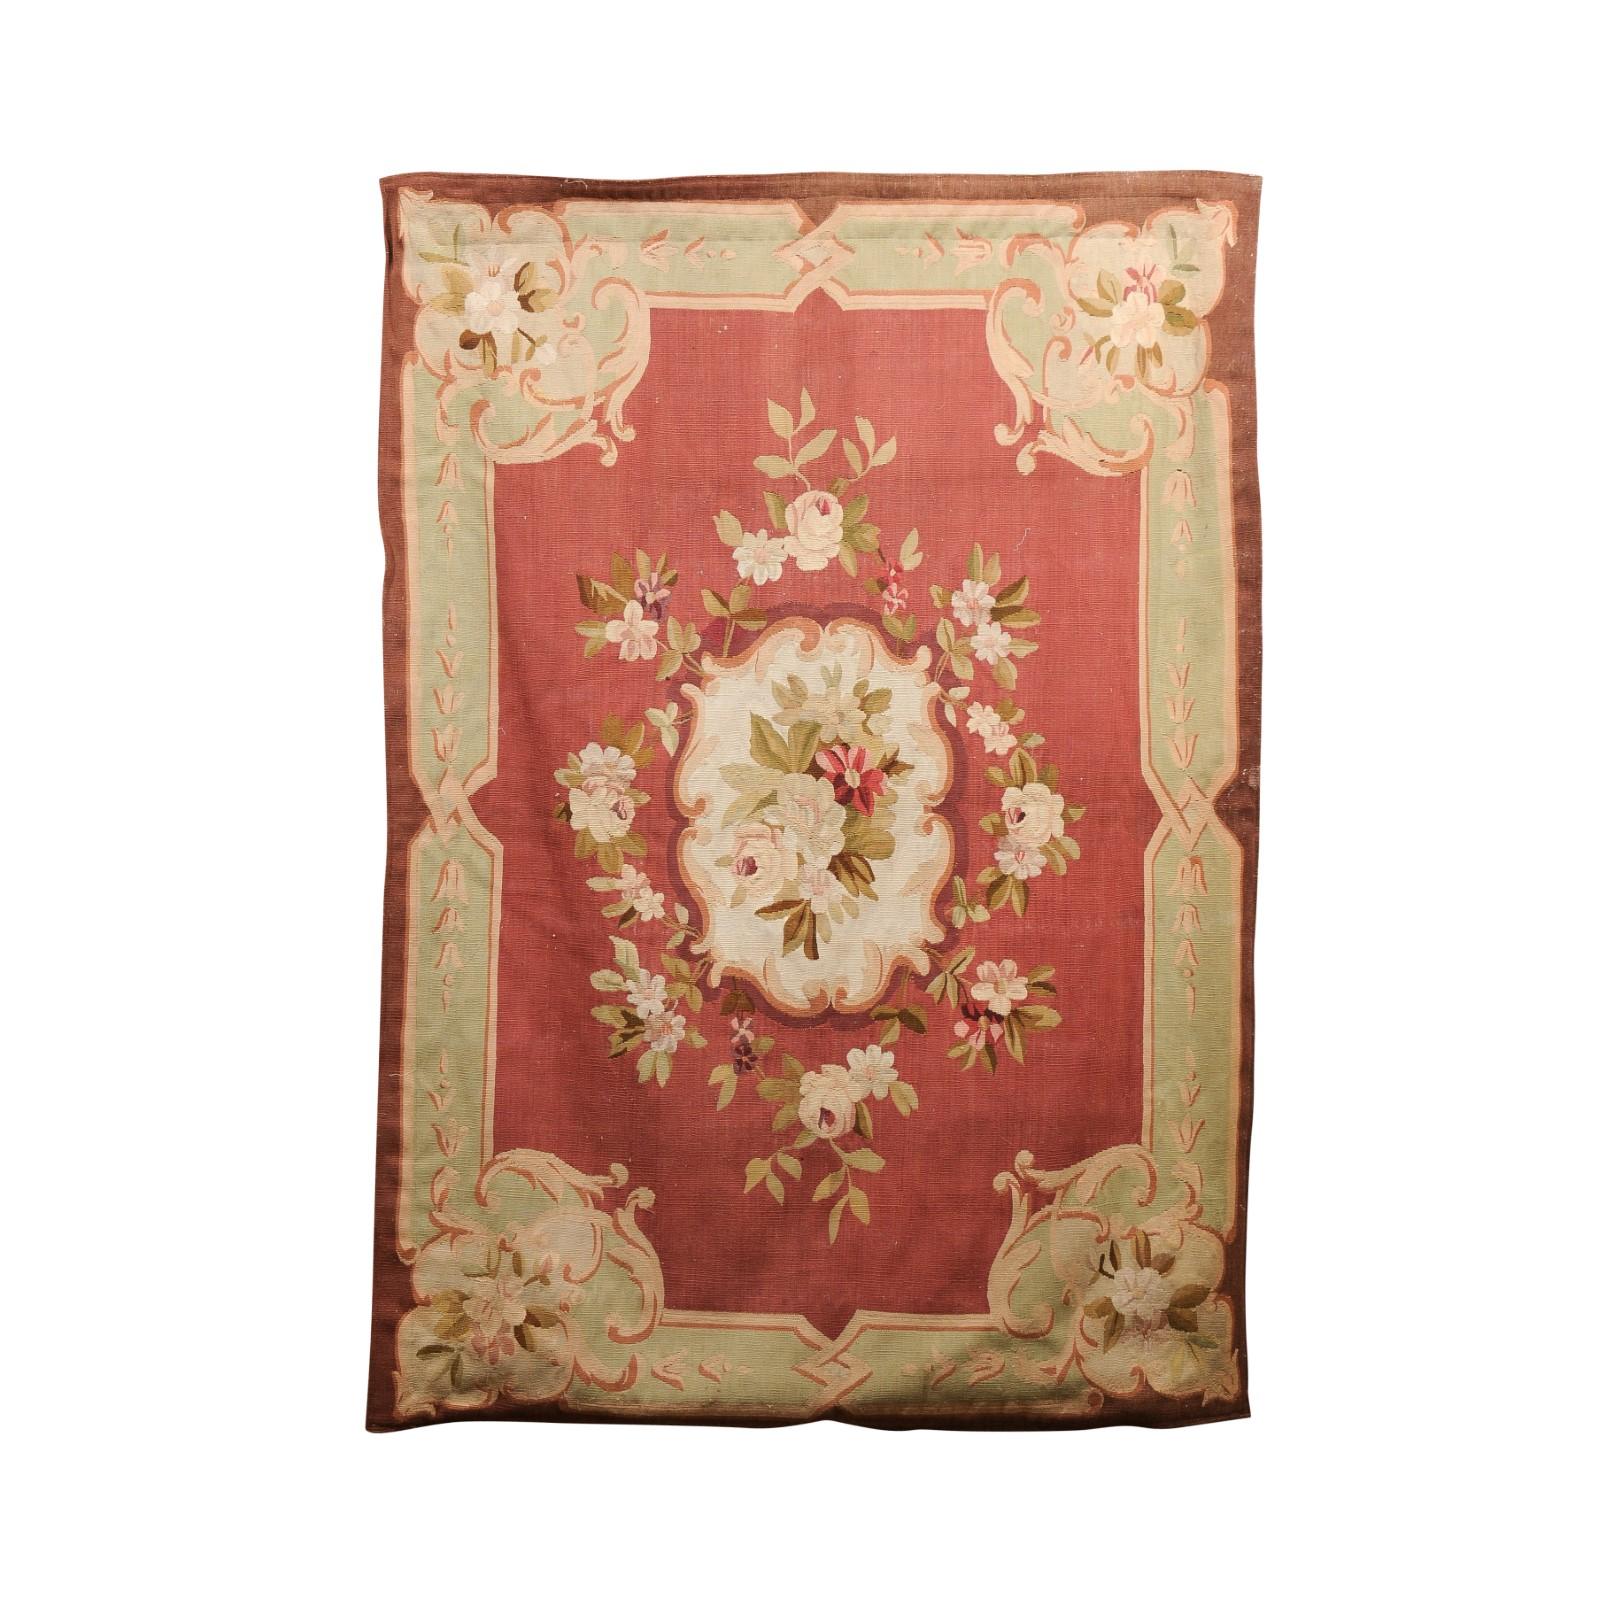 A French Royal Manufacture of Aubusson woven tapestry from the 19th century, with floral motifs and red, light green and brown tones. Created during the 19th century in the Aubusson manufacture located in central France, this wall tapestry features